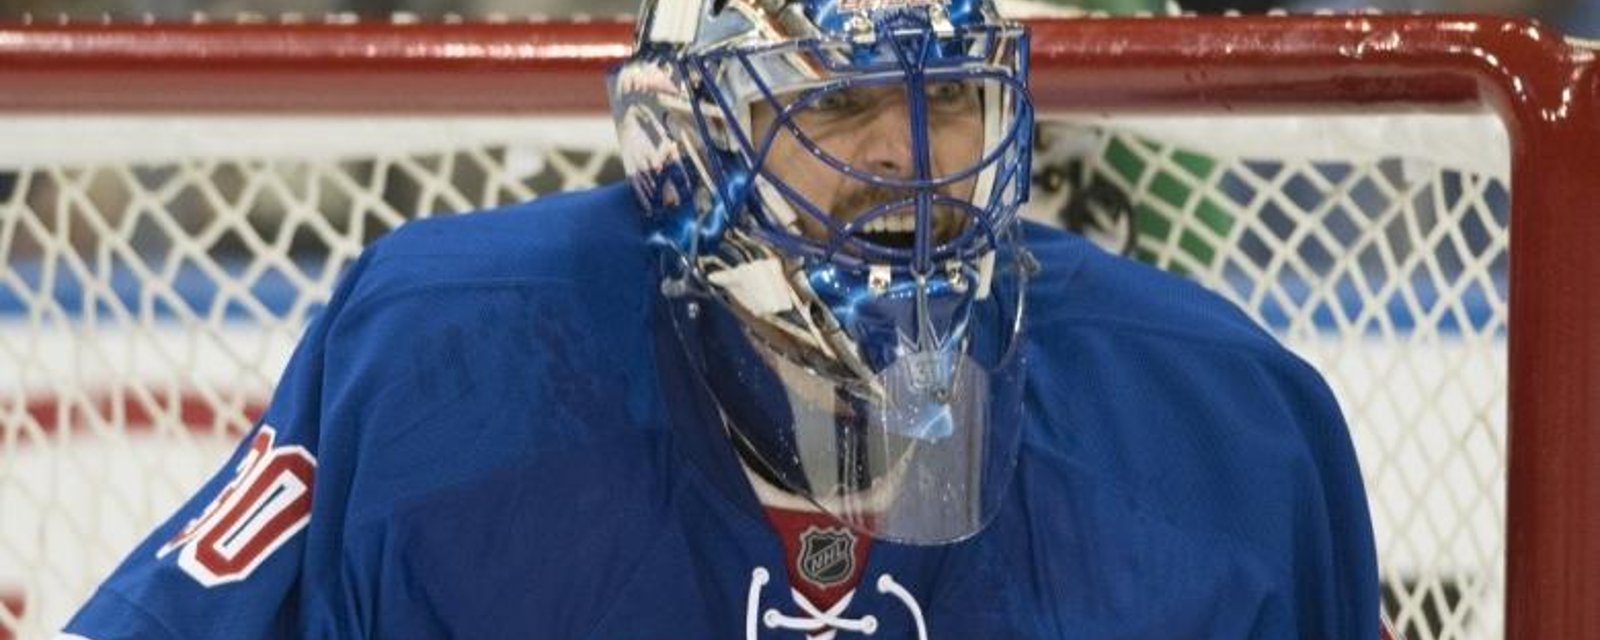 Henrik Lundqvist unveils an awesome new mask for the World Cup!